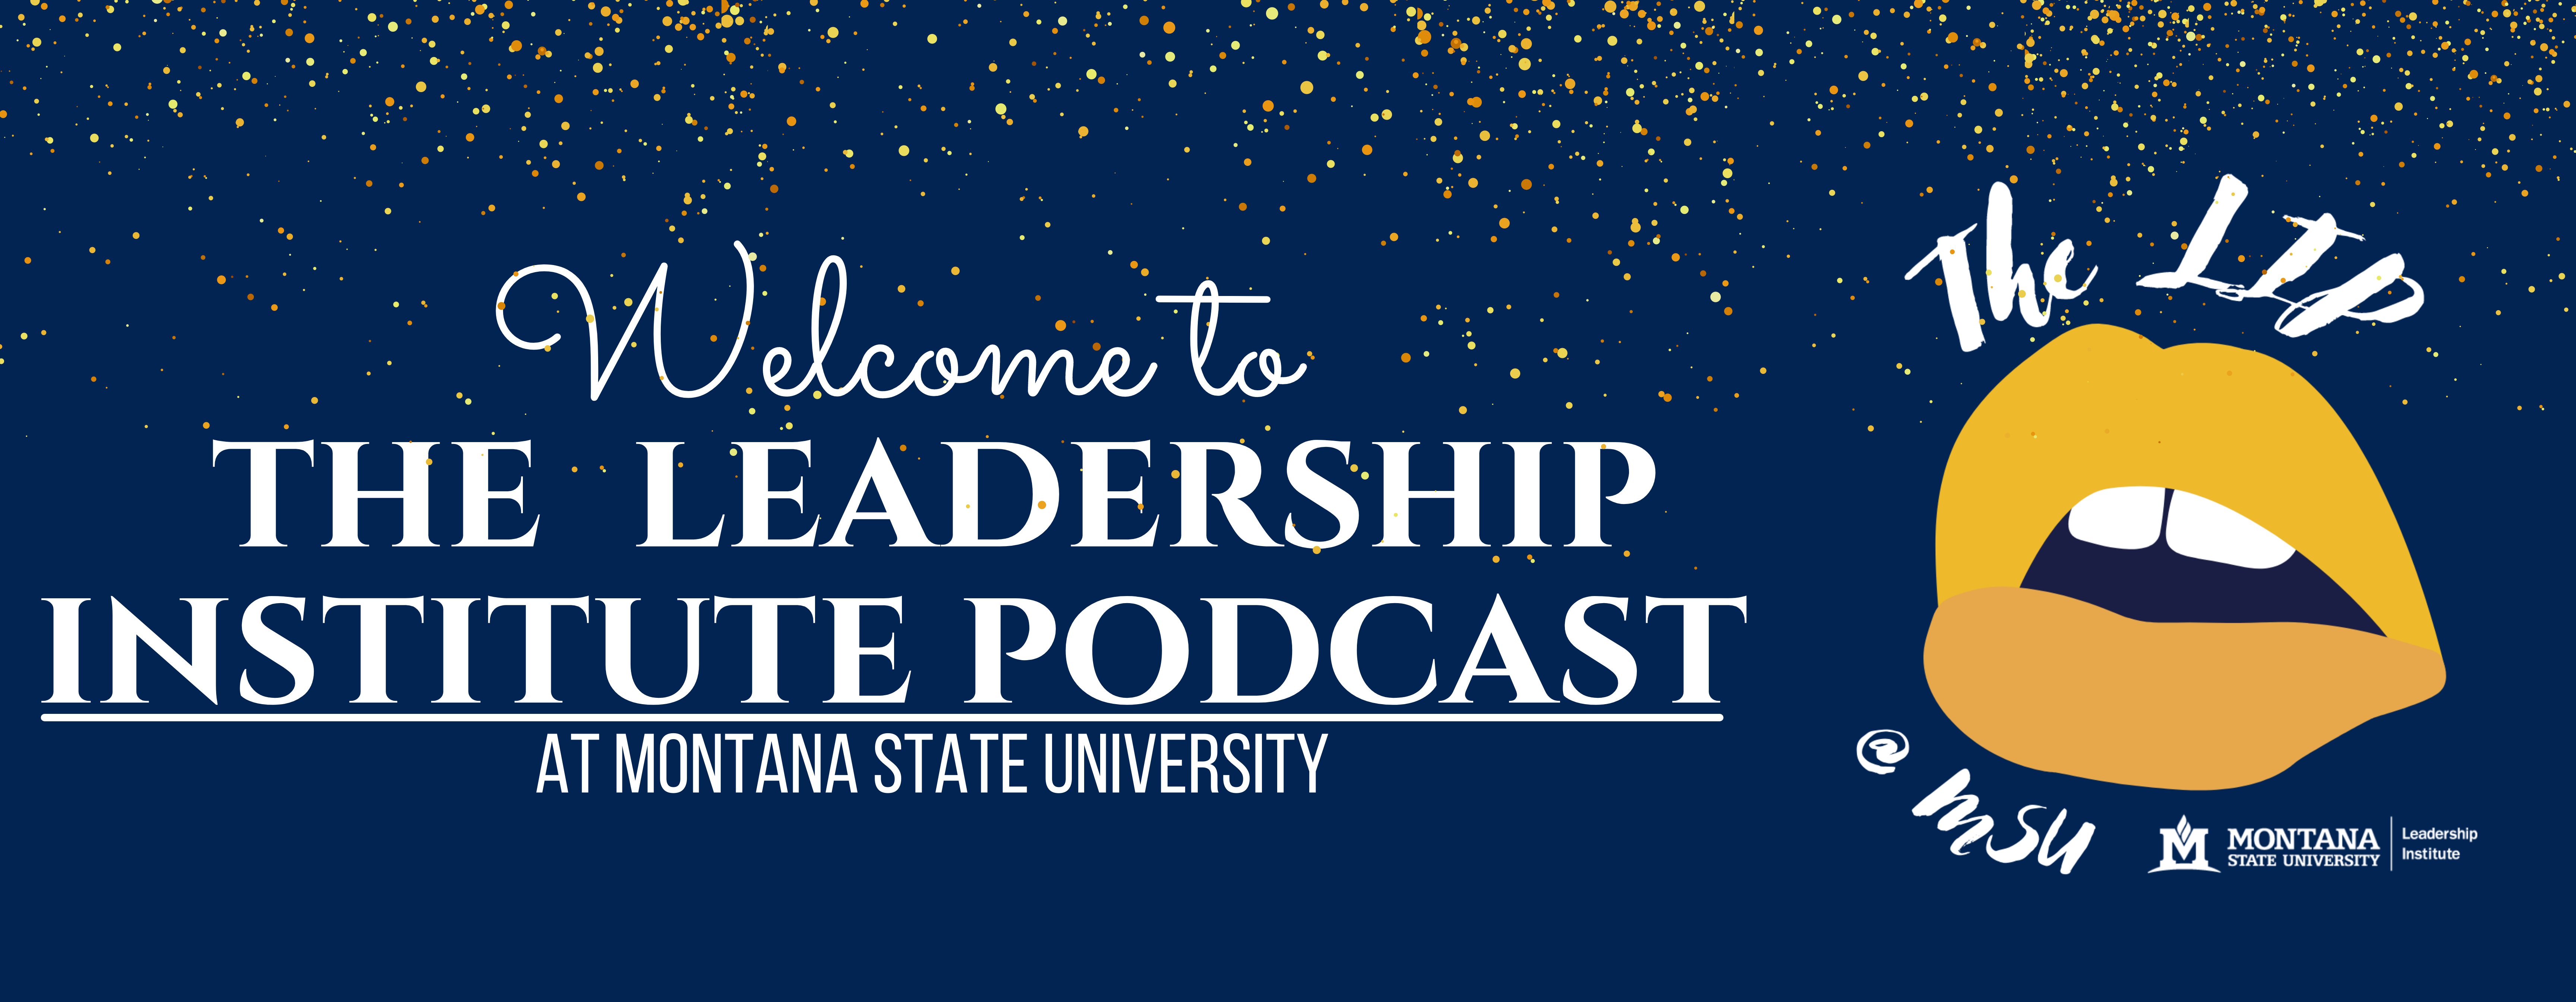 Welcome to the Leadership Institute Podcast at Montana State University